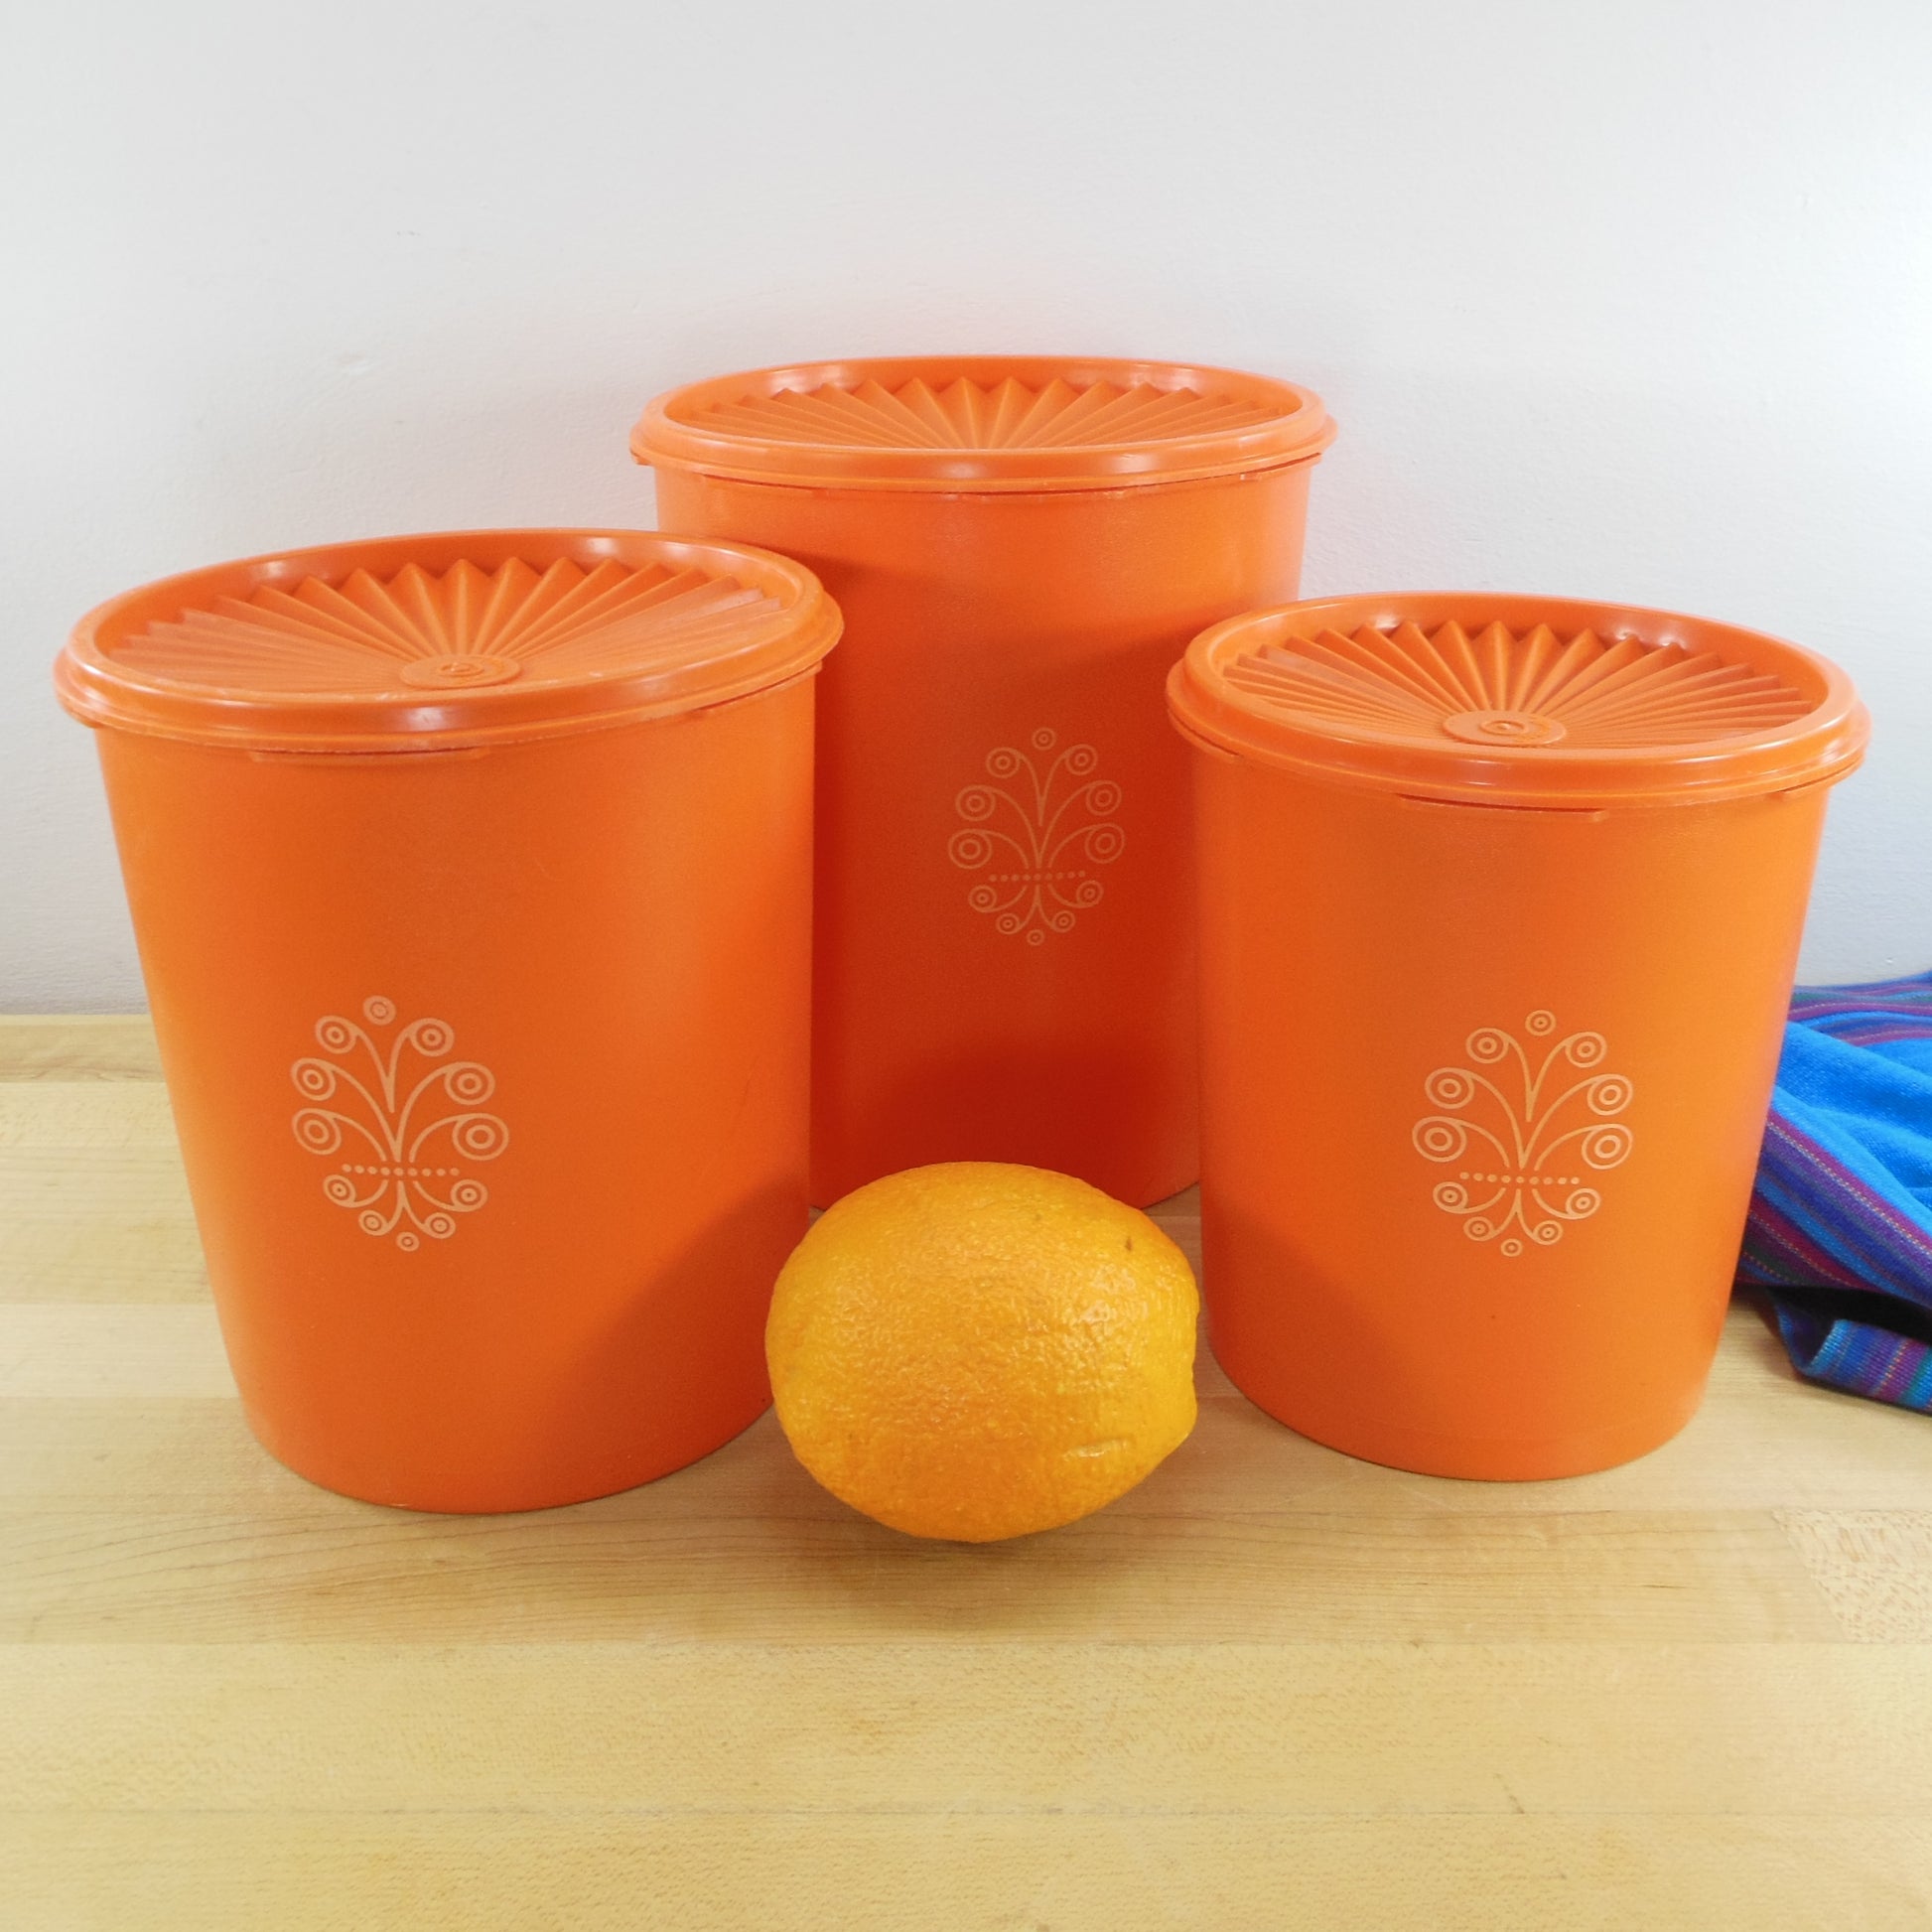 Tupperware Canister Scoops Rocker Style Scoops Set of 5 Creamsicle Orange